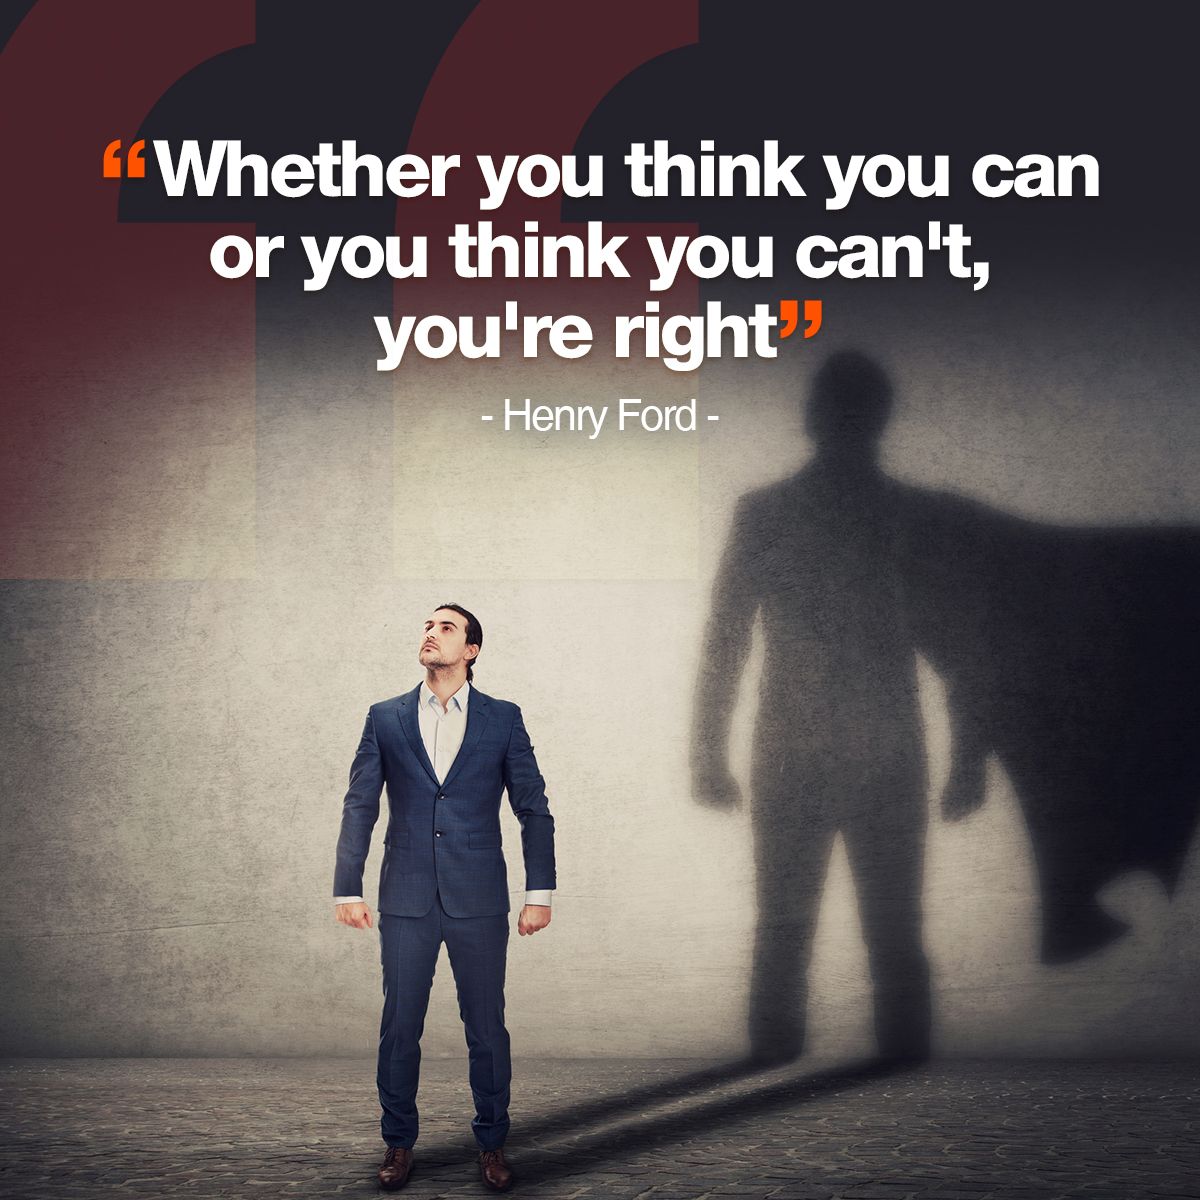 Whether you think you can or you think you can't, you're right – Henry Ford